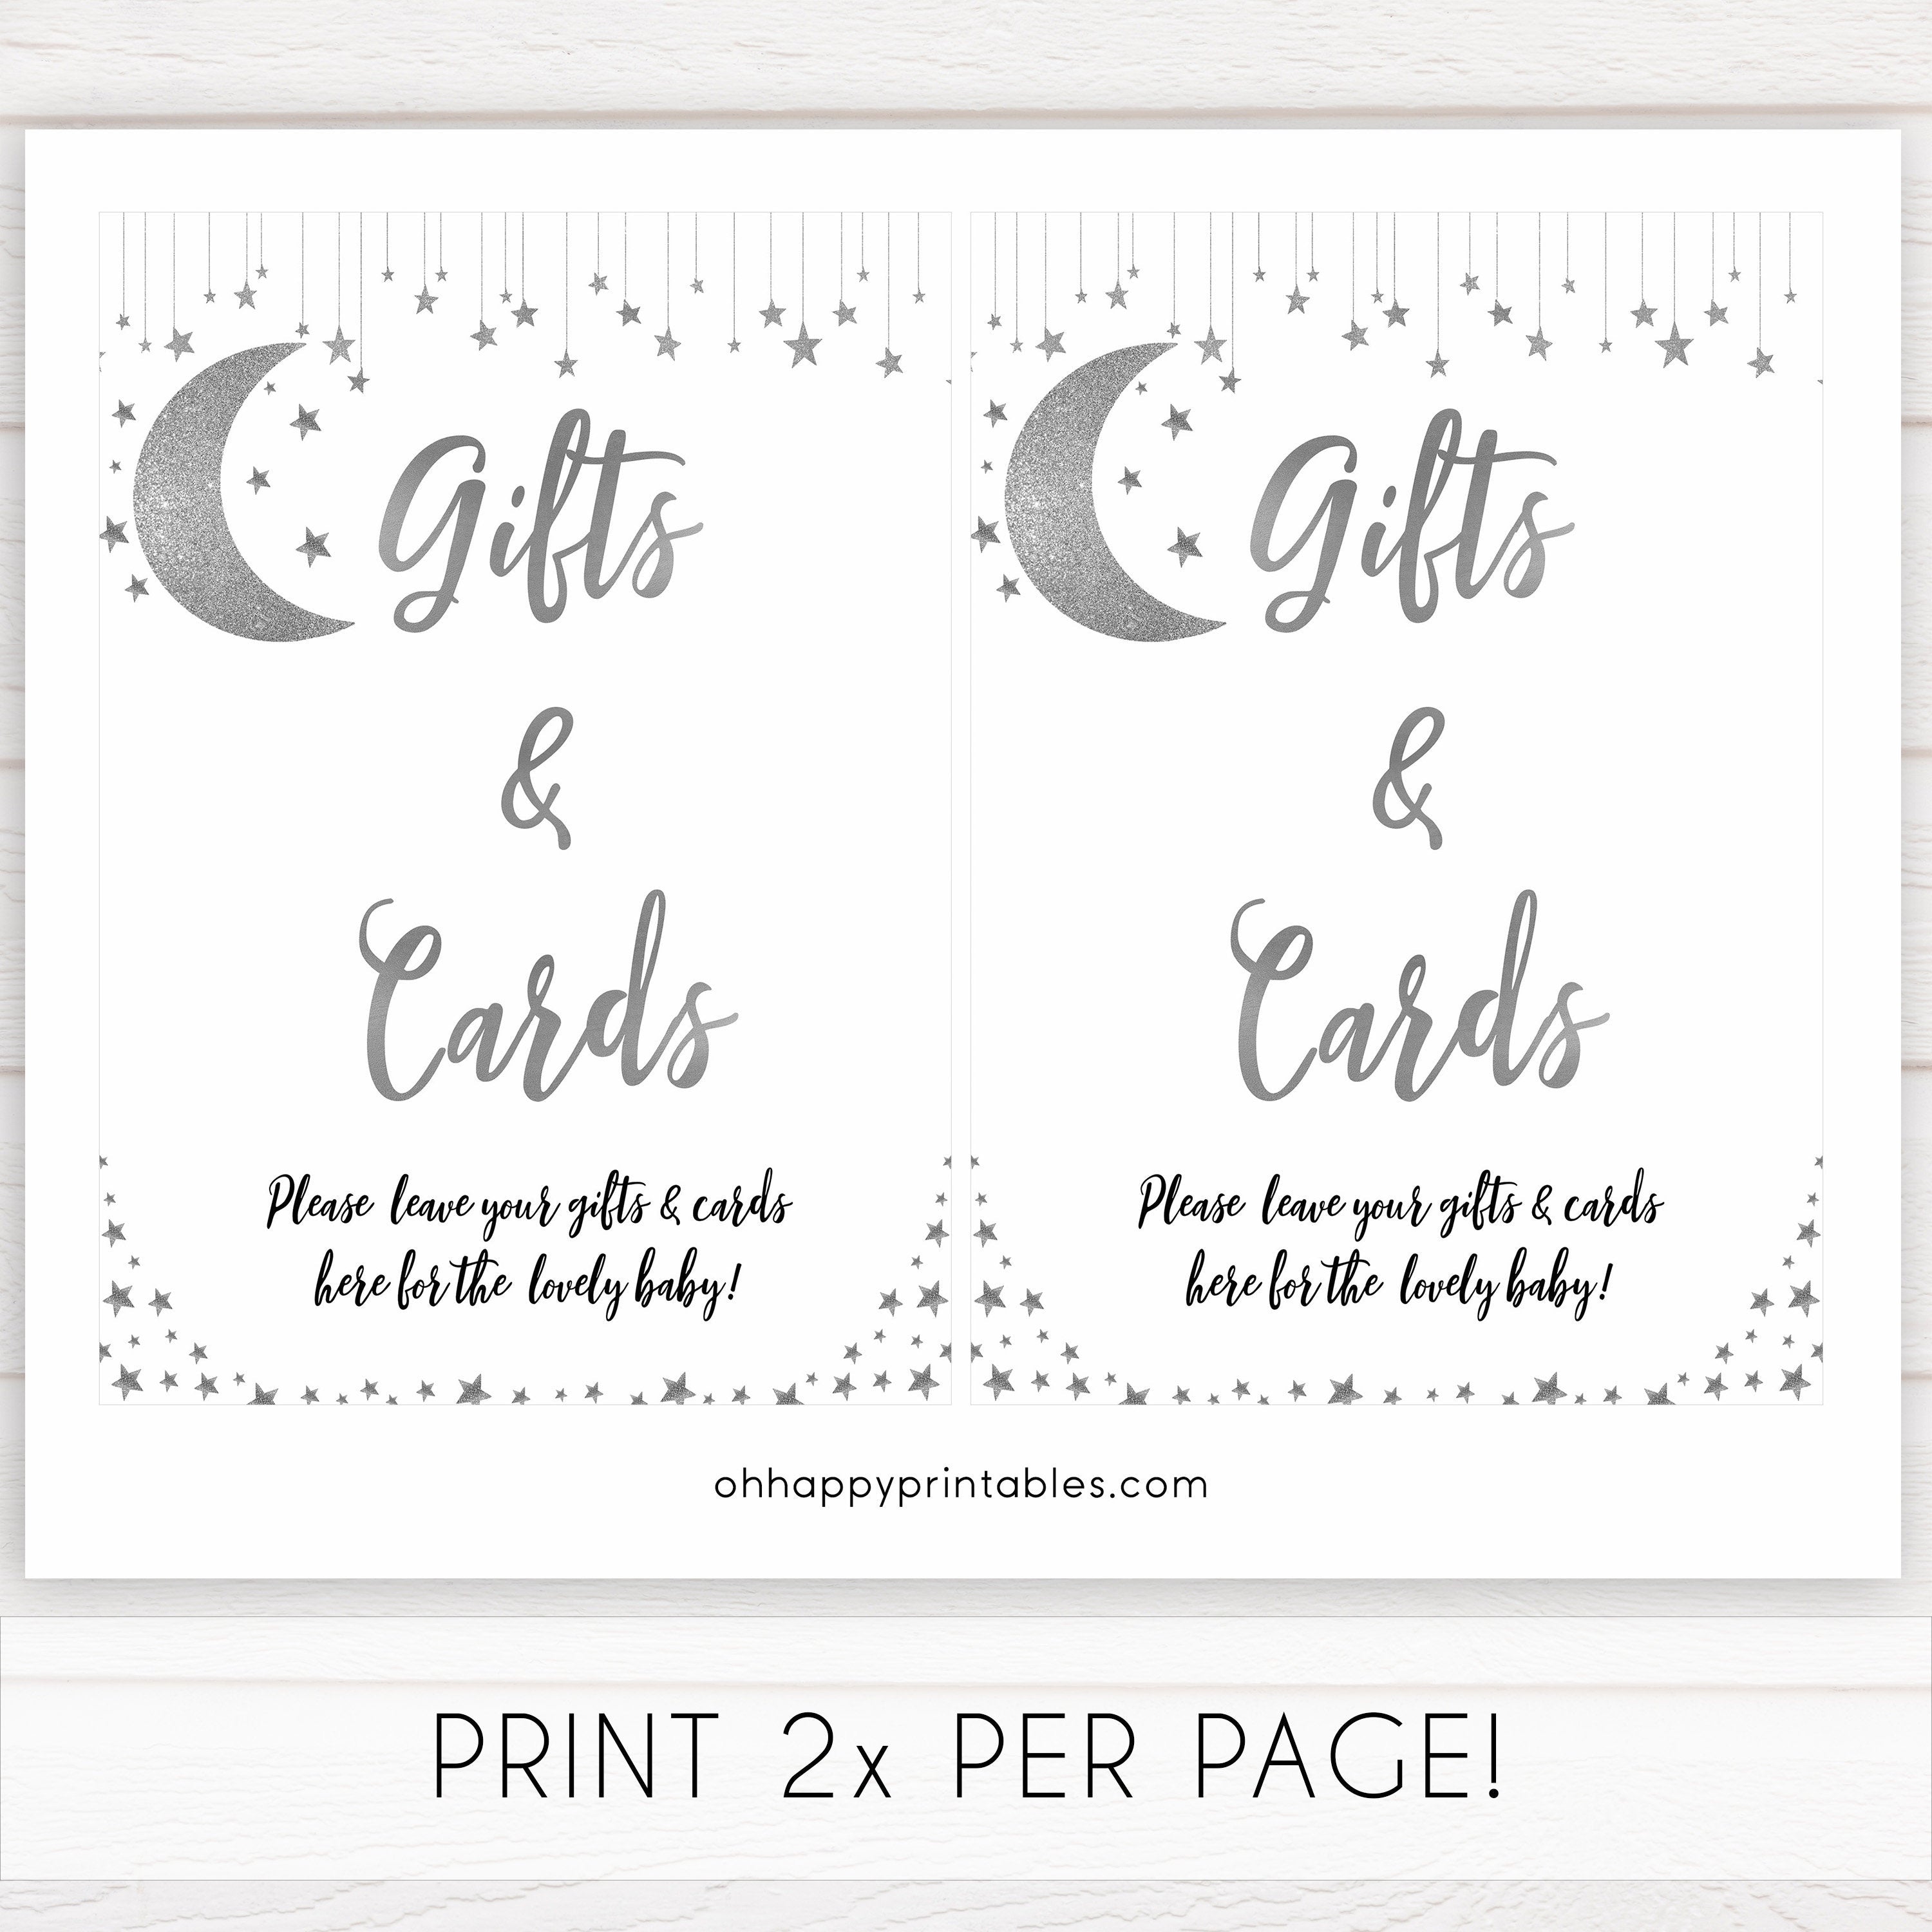 gifts and cards baby sign, Little star baby signs, printable baby signs, printable baby decor, twinkle baby shower, star baby decor, fun baby shower ideas, top baby shower themes